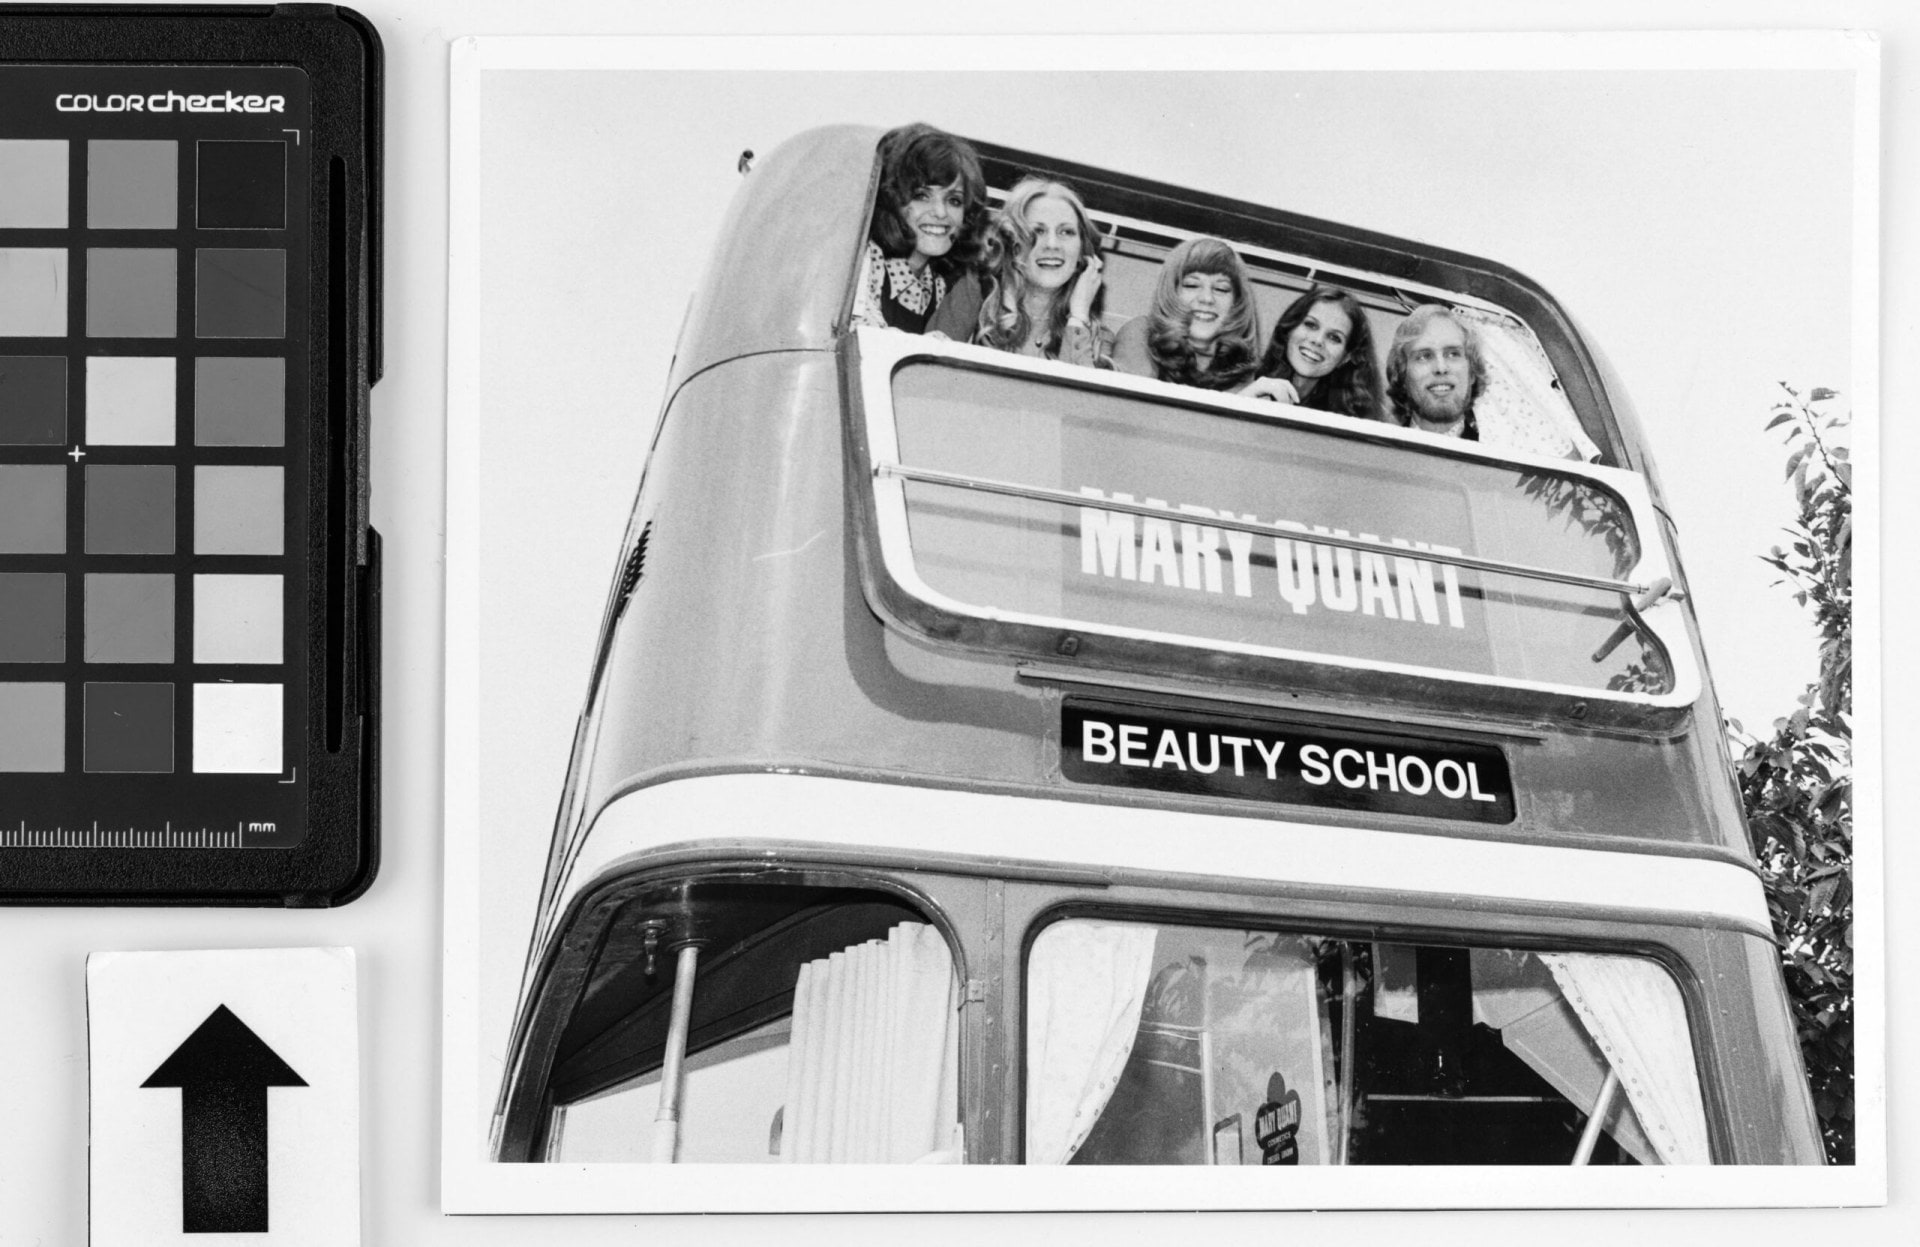 Mary Quant beauty bus